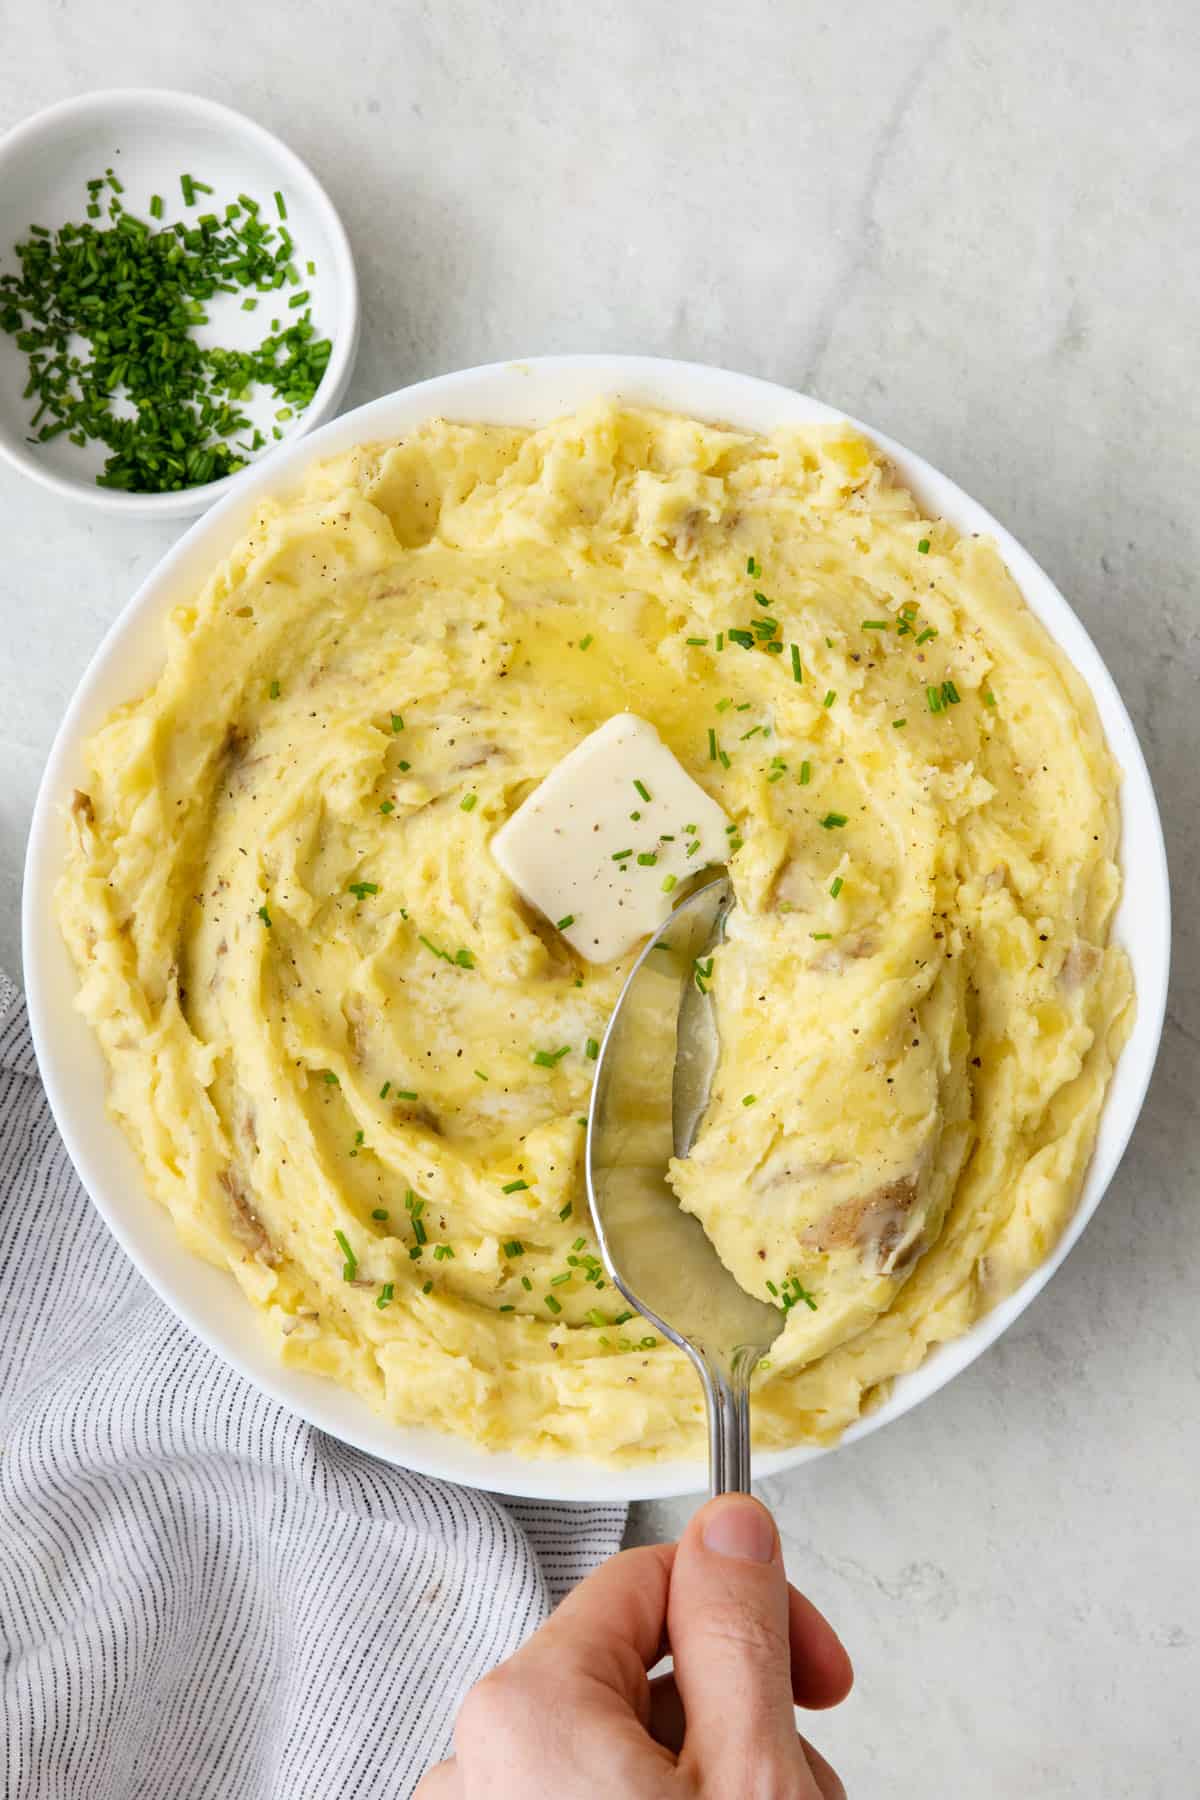 Large serving dish of garlic mashed potatoes topped with butter and herbs with a spoon scooping up some.